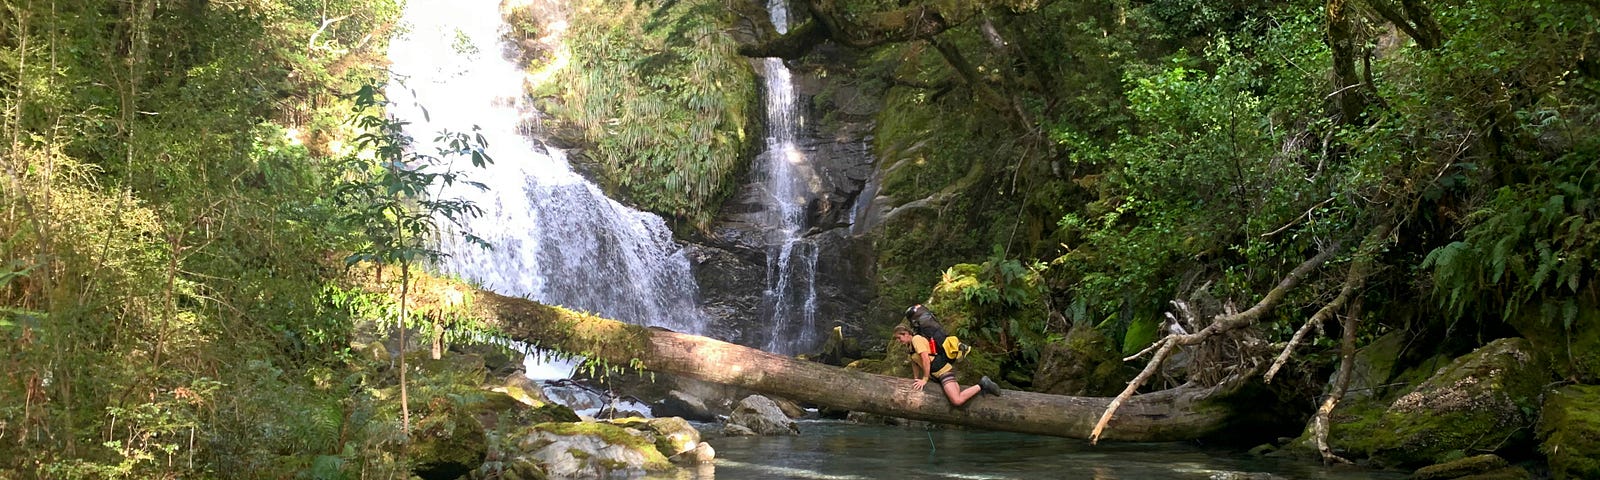 Woman wearing a backpack moves while sitting, across a large log over a river with waterfalls in the background. The river is surrounded by large trees.